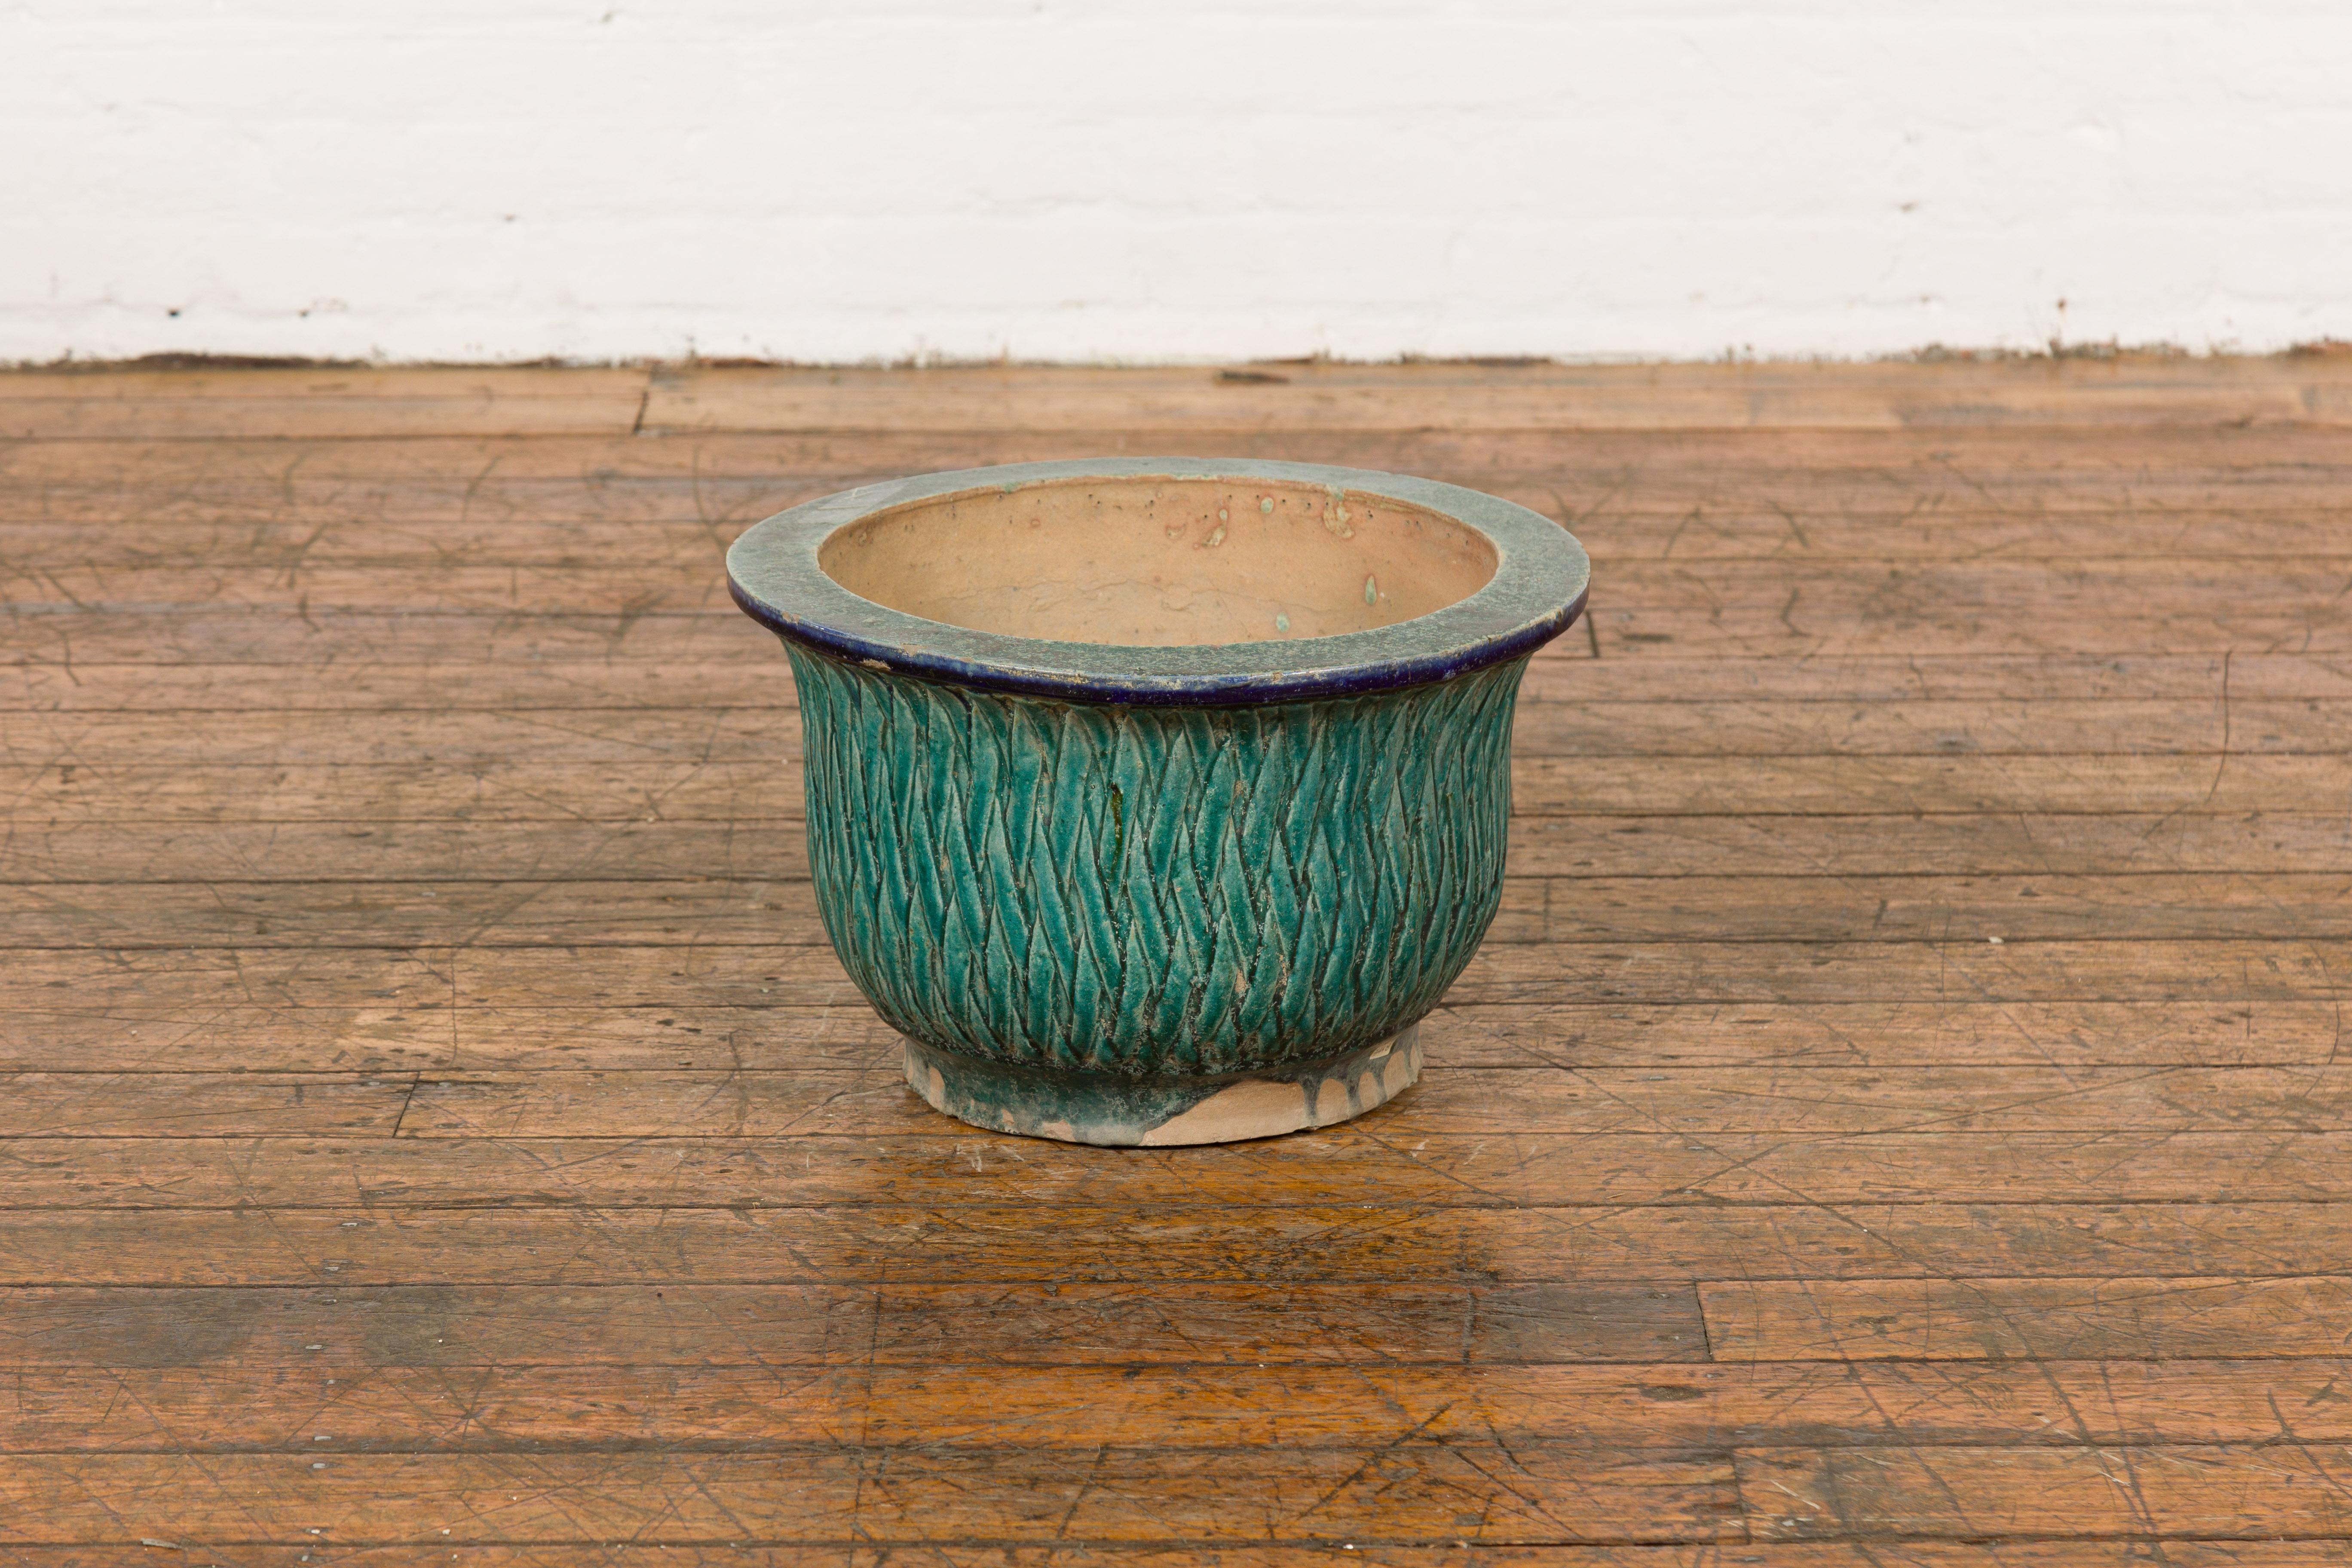 Multi-Glaze Planter with Green and Blue Accents, Qing Dynasty Period For Sale 2